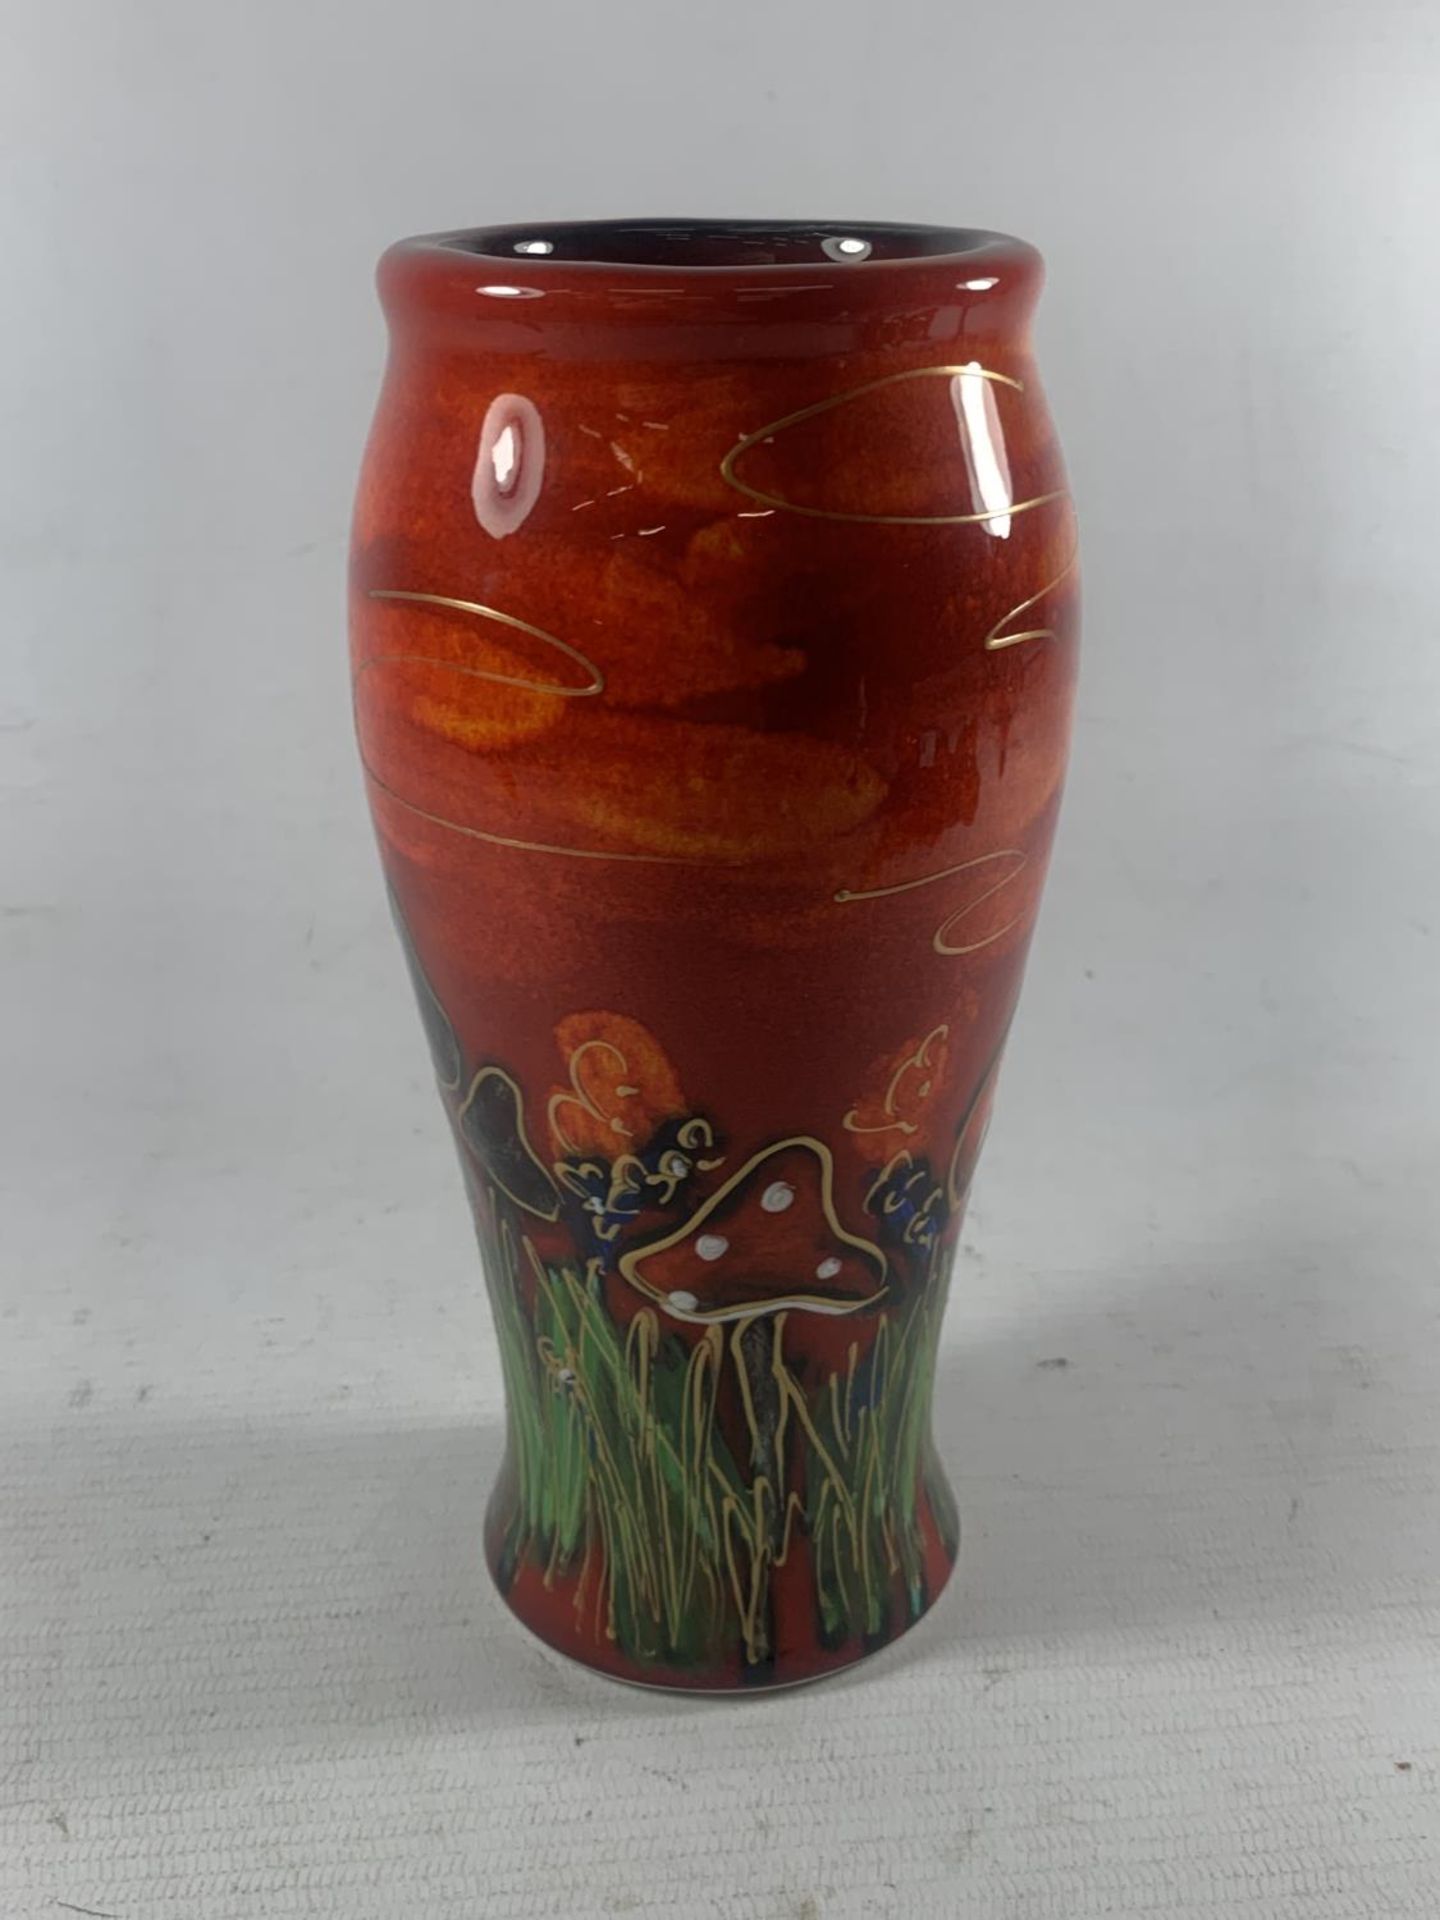 AN ANITA HARRIS TOADSTOOLS VASE HAND PAINTED AND SIGNED IN GOLD